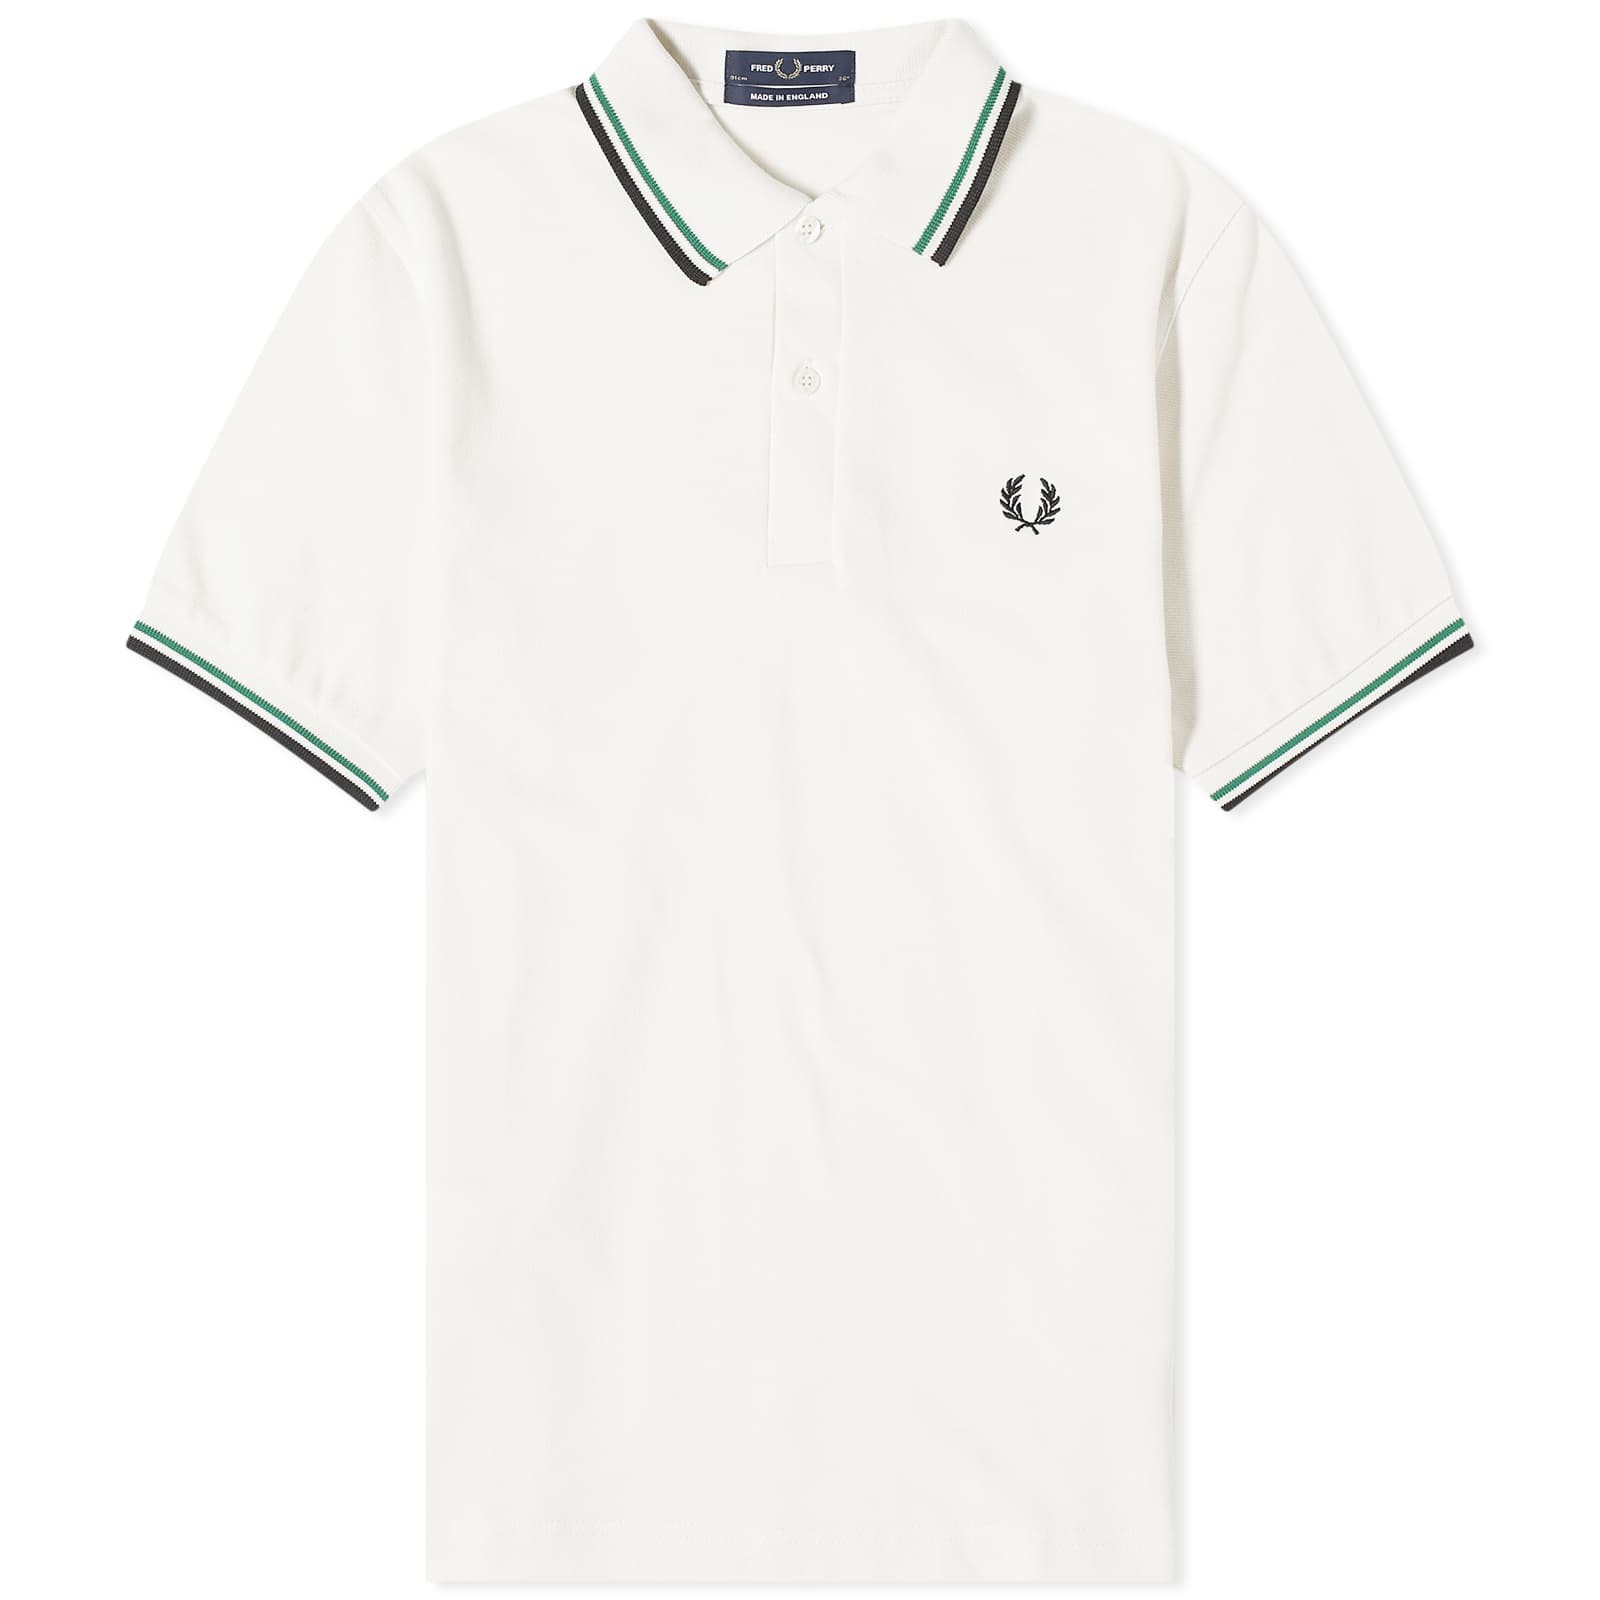 Футболка-поло Fred Perry Twin Tipped, кремовый женская футболка fred perry printed graphic